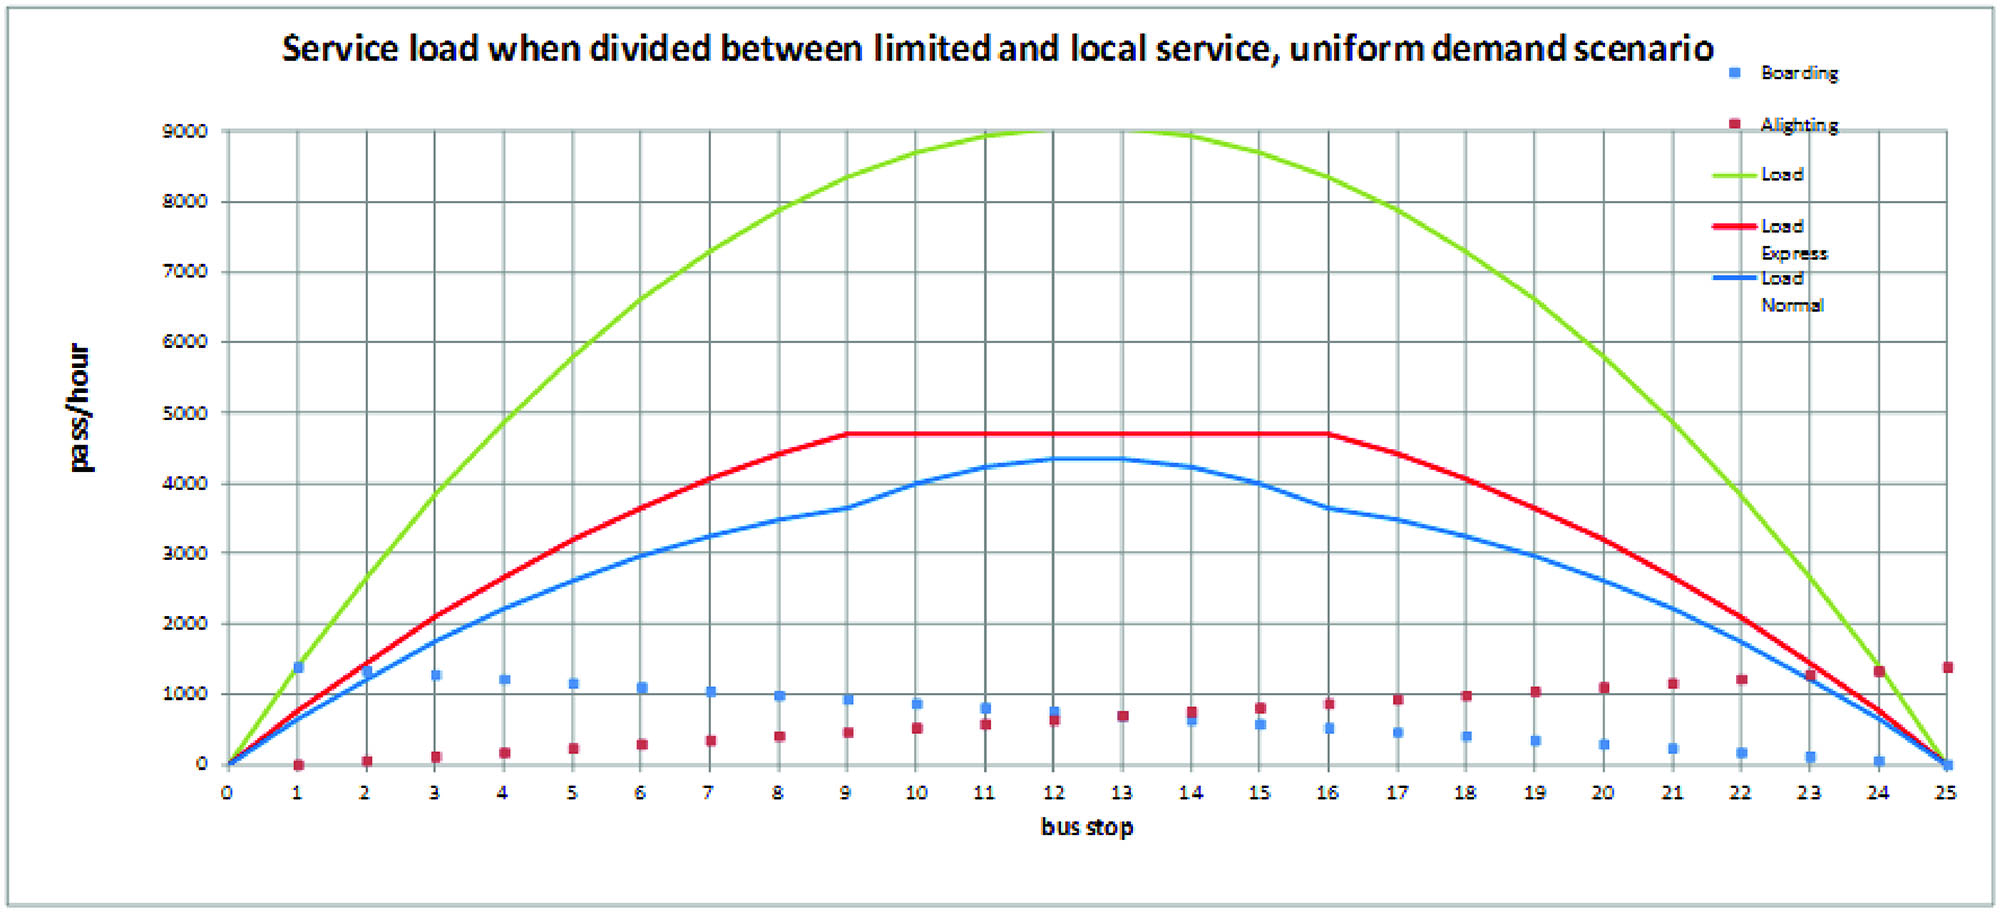 Fig. 6.63 Service Load divided between the local and the limited service in a uniform demand example scenario. Image